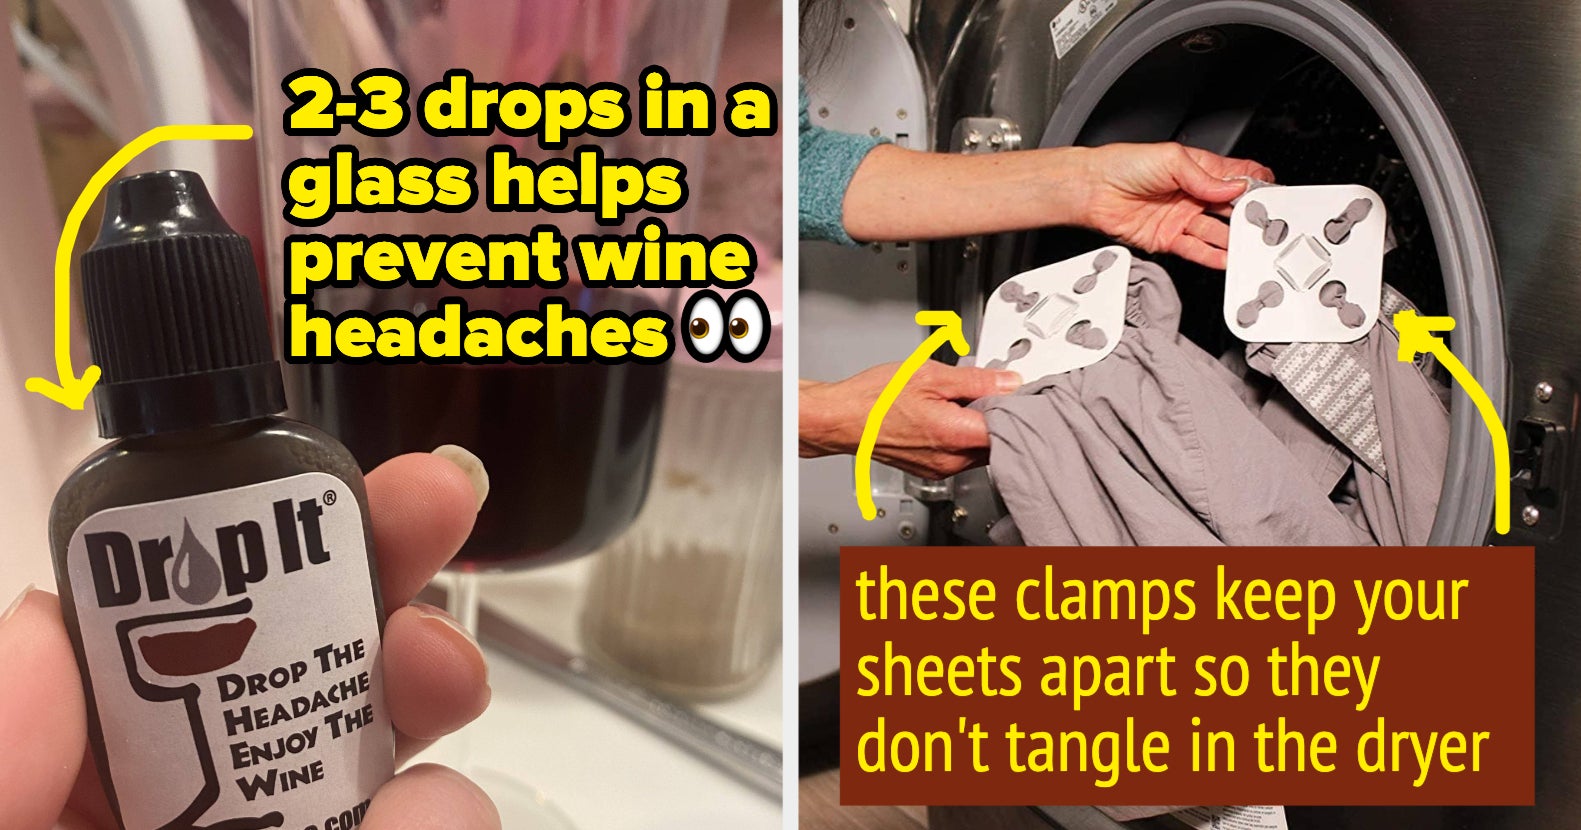 36 Cheap And Useful Products To Make Life Easier